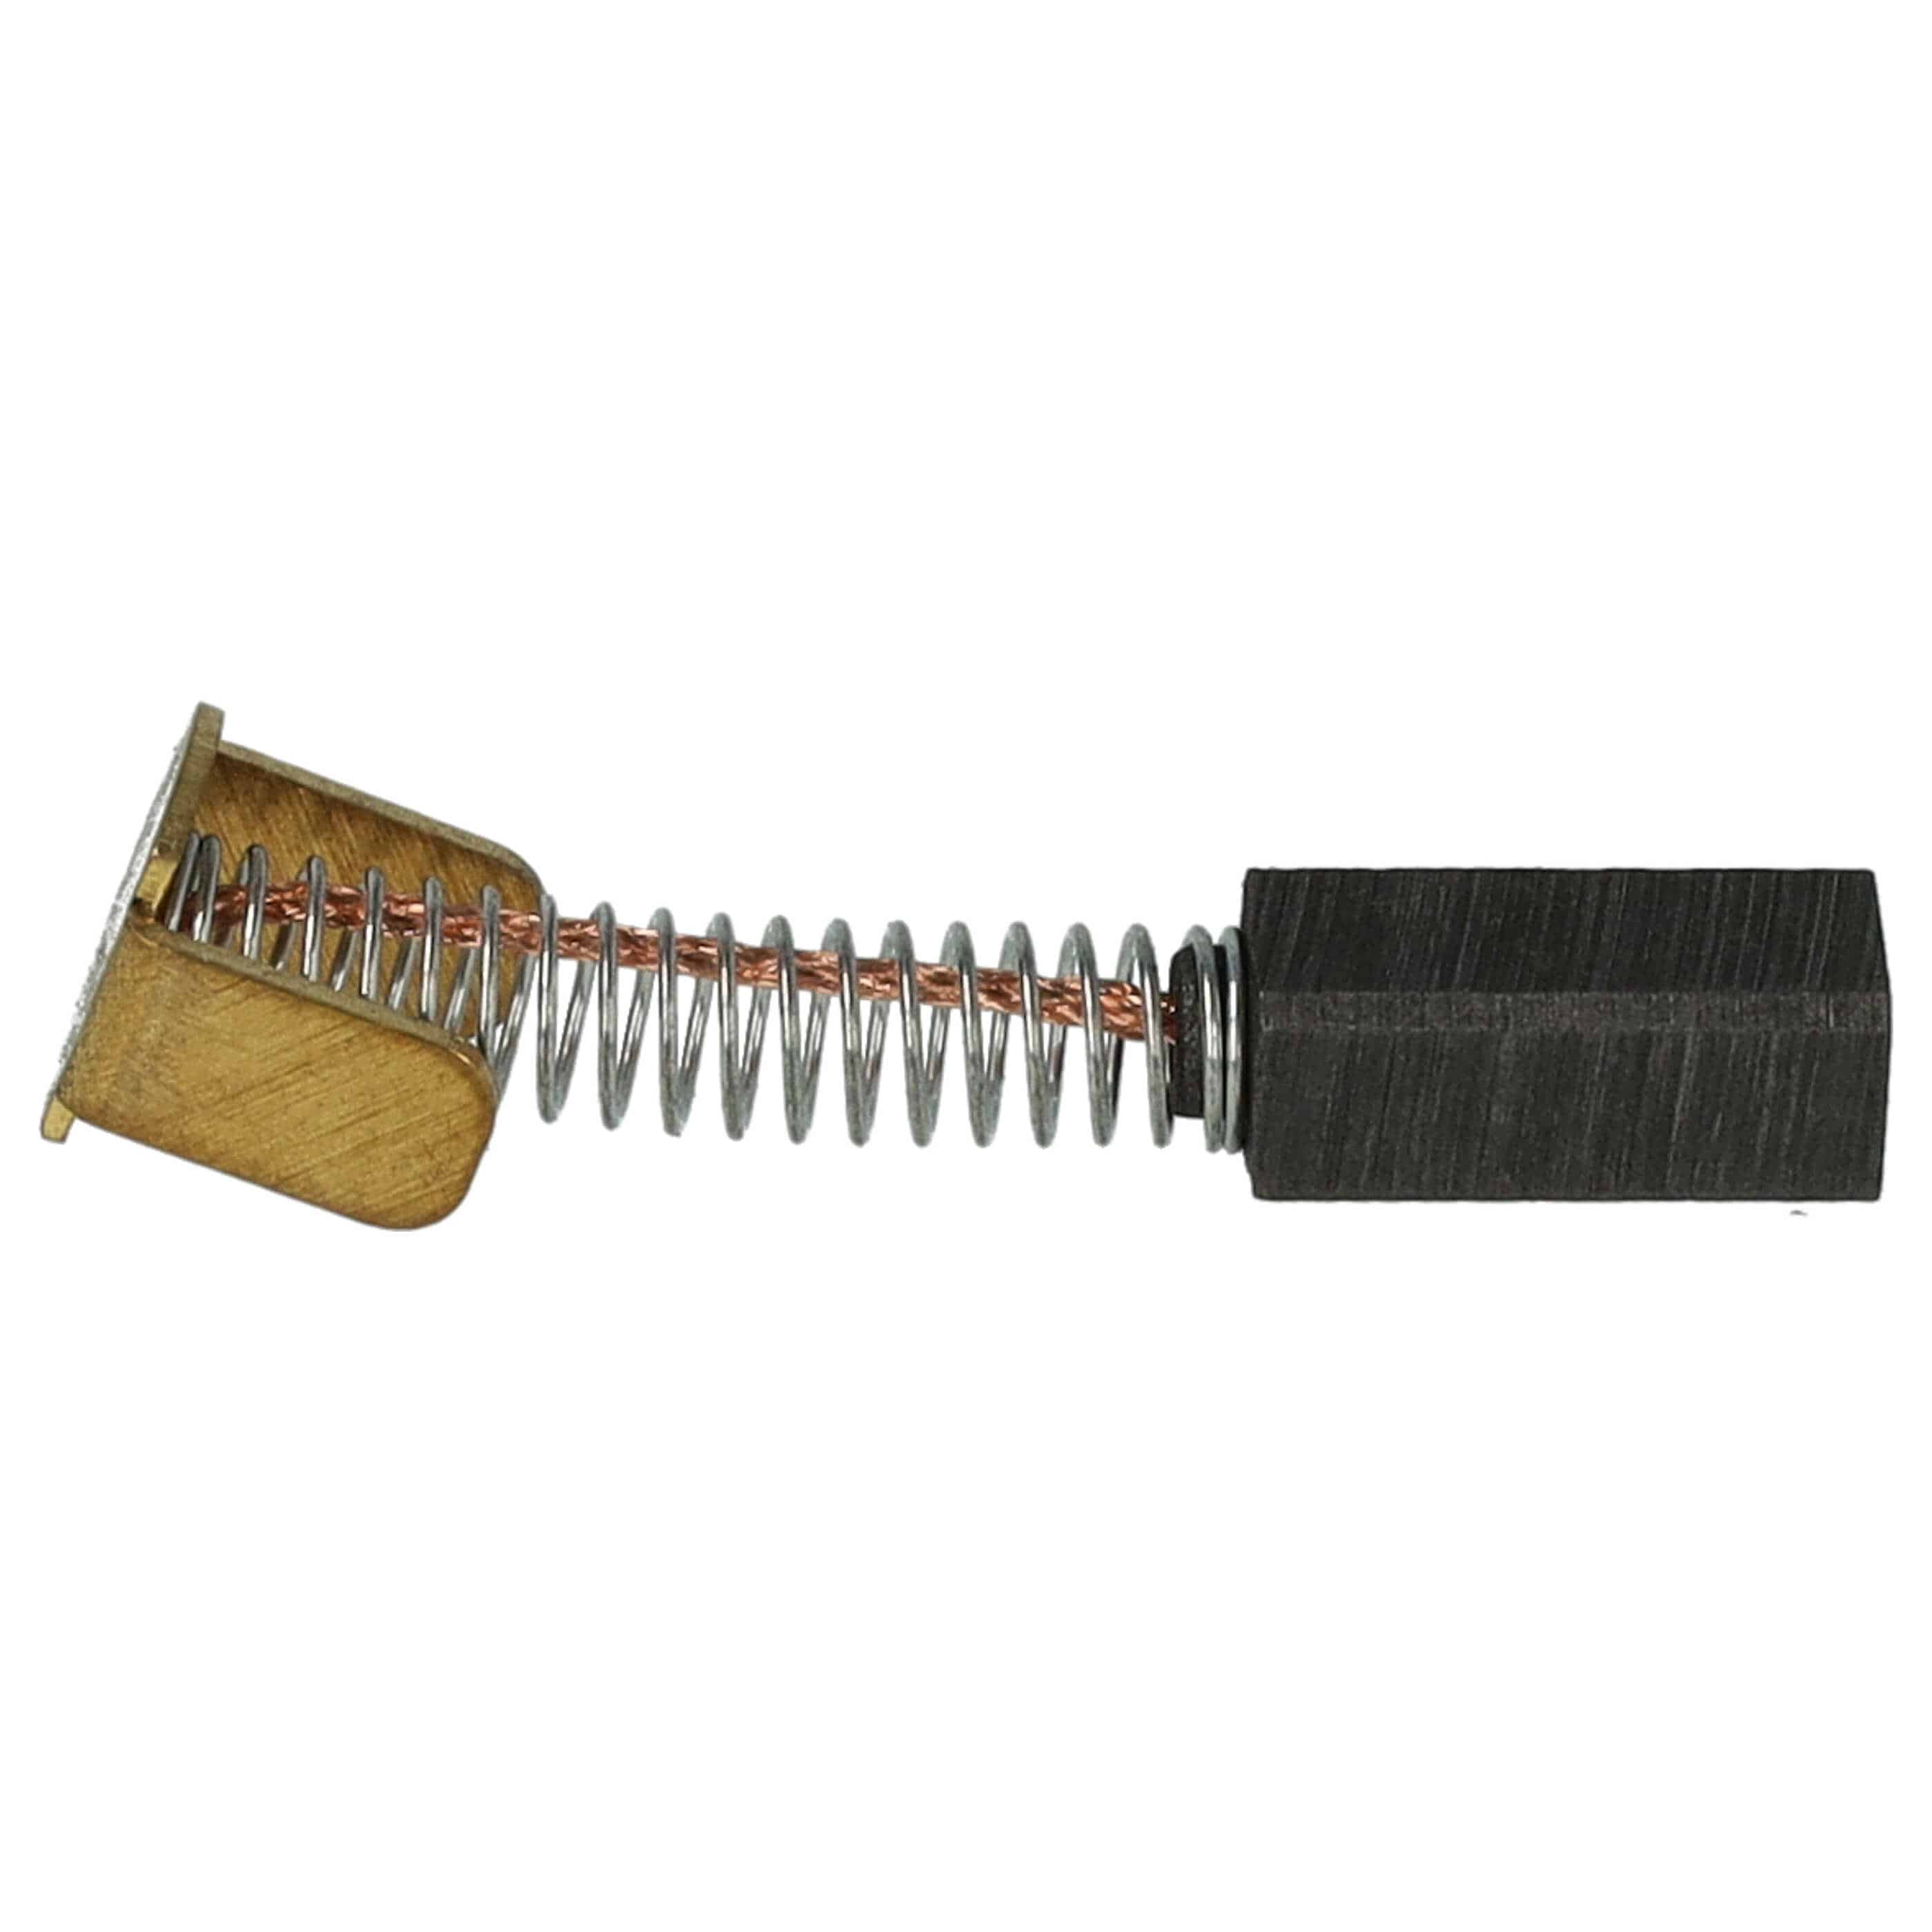 2x Carbon Brush as Replacement for Hitachi / Hikoki 999045 Electric Power Tools + Spring, 10 x 4.3 x 4mm